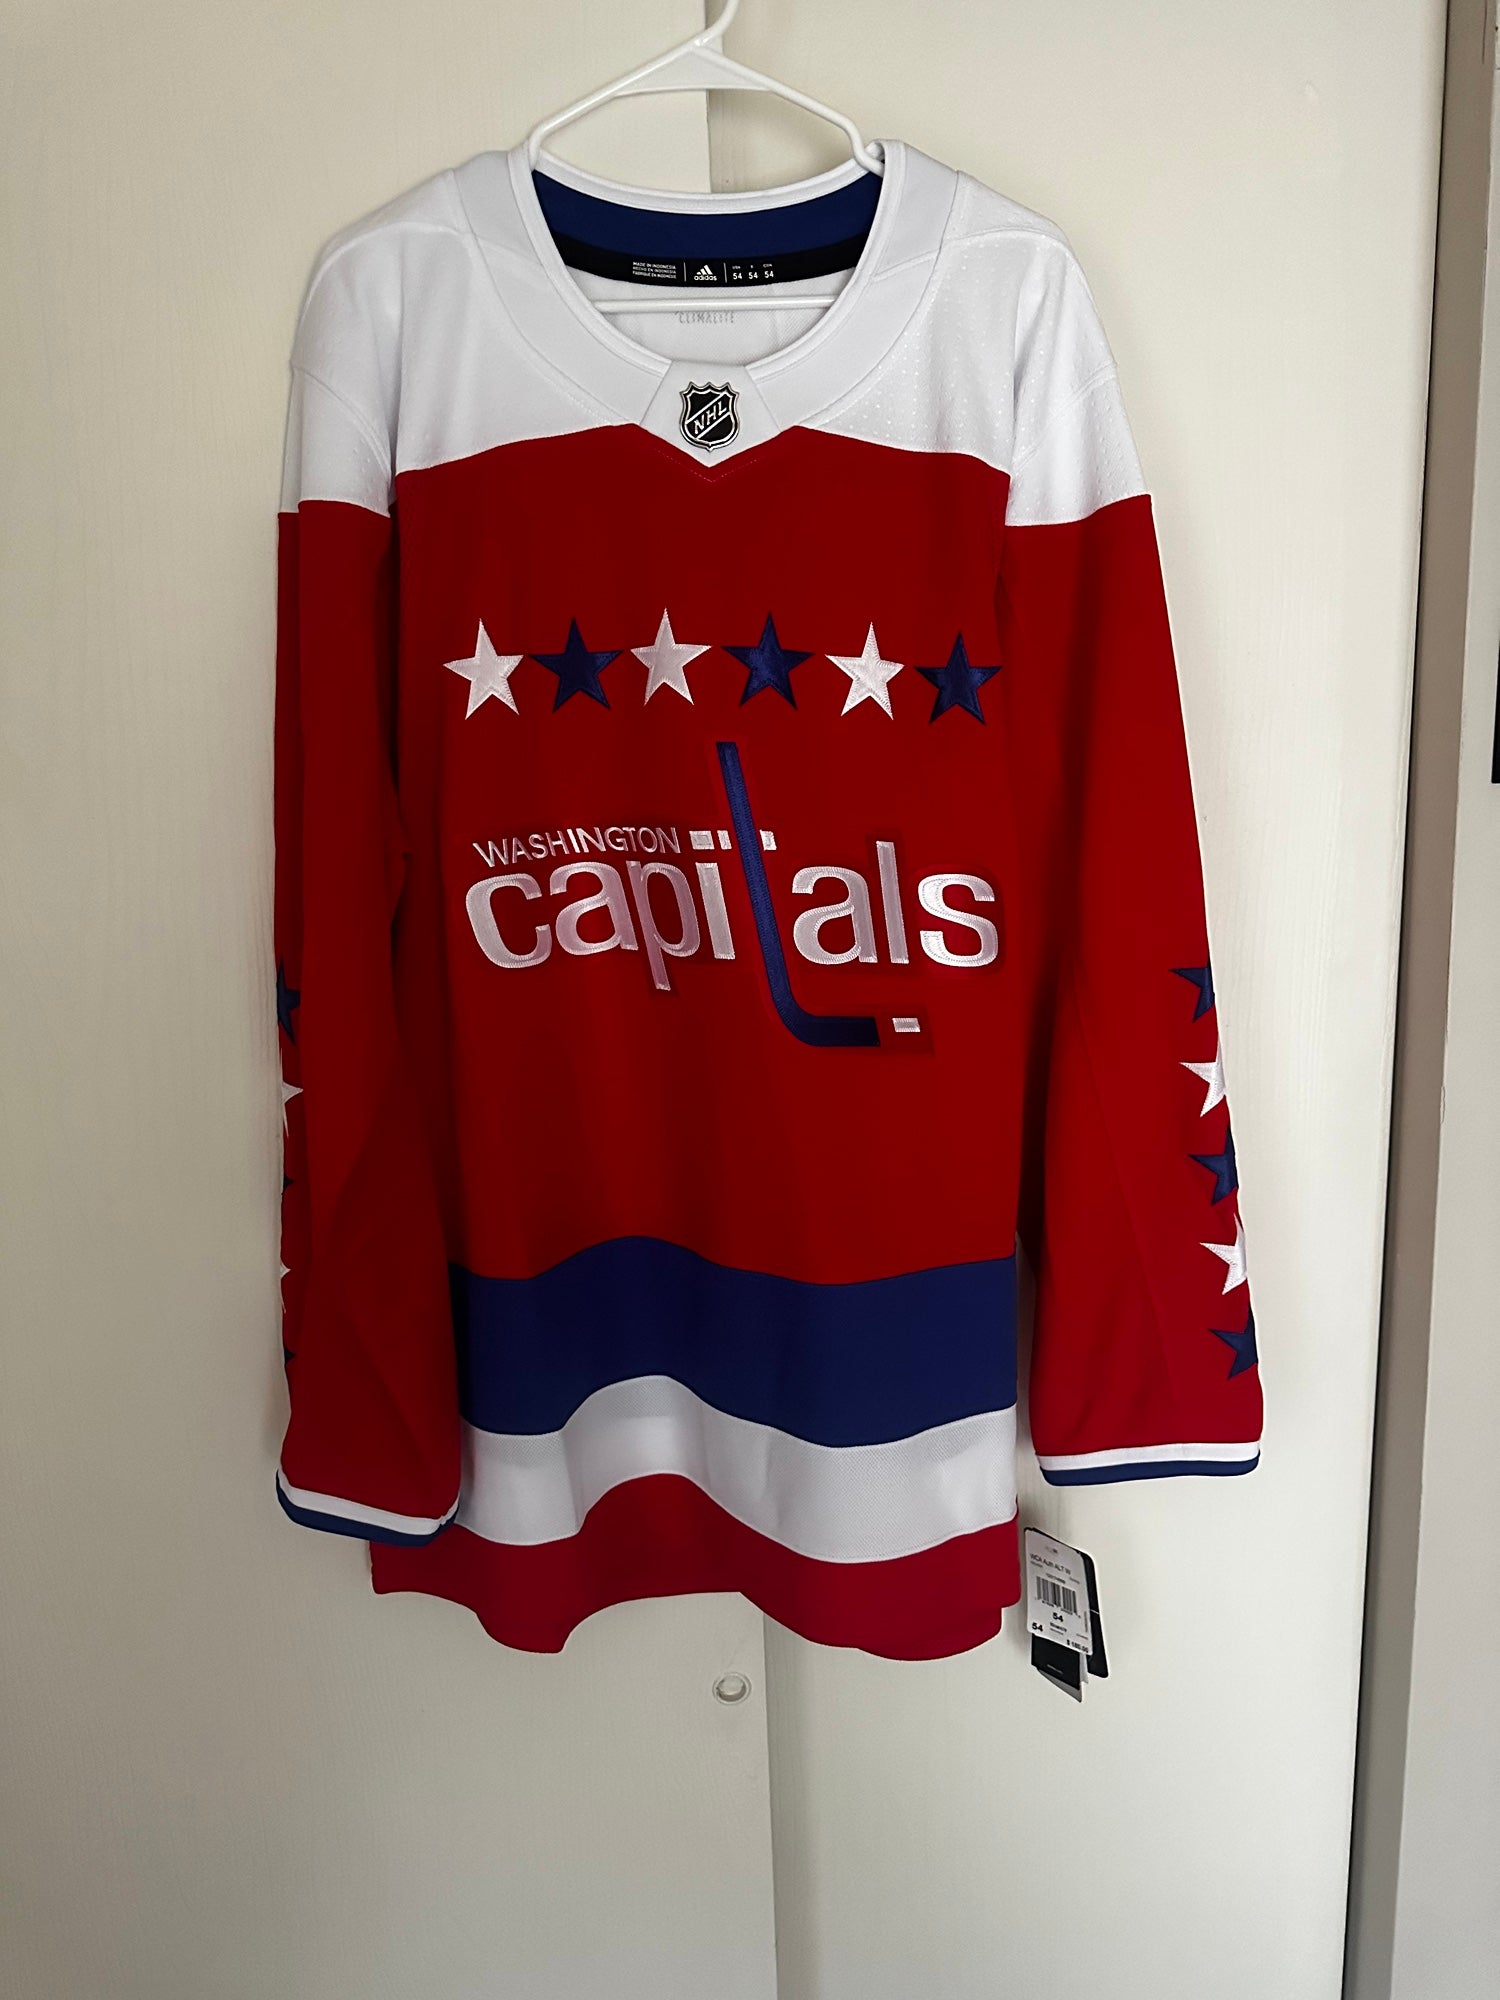 Washington Capitals Fan Shop  Buy and Sell on SidelineSwap